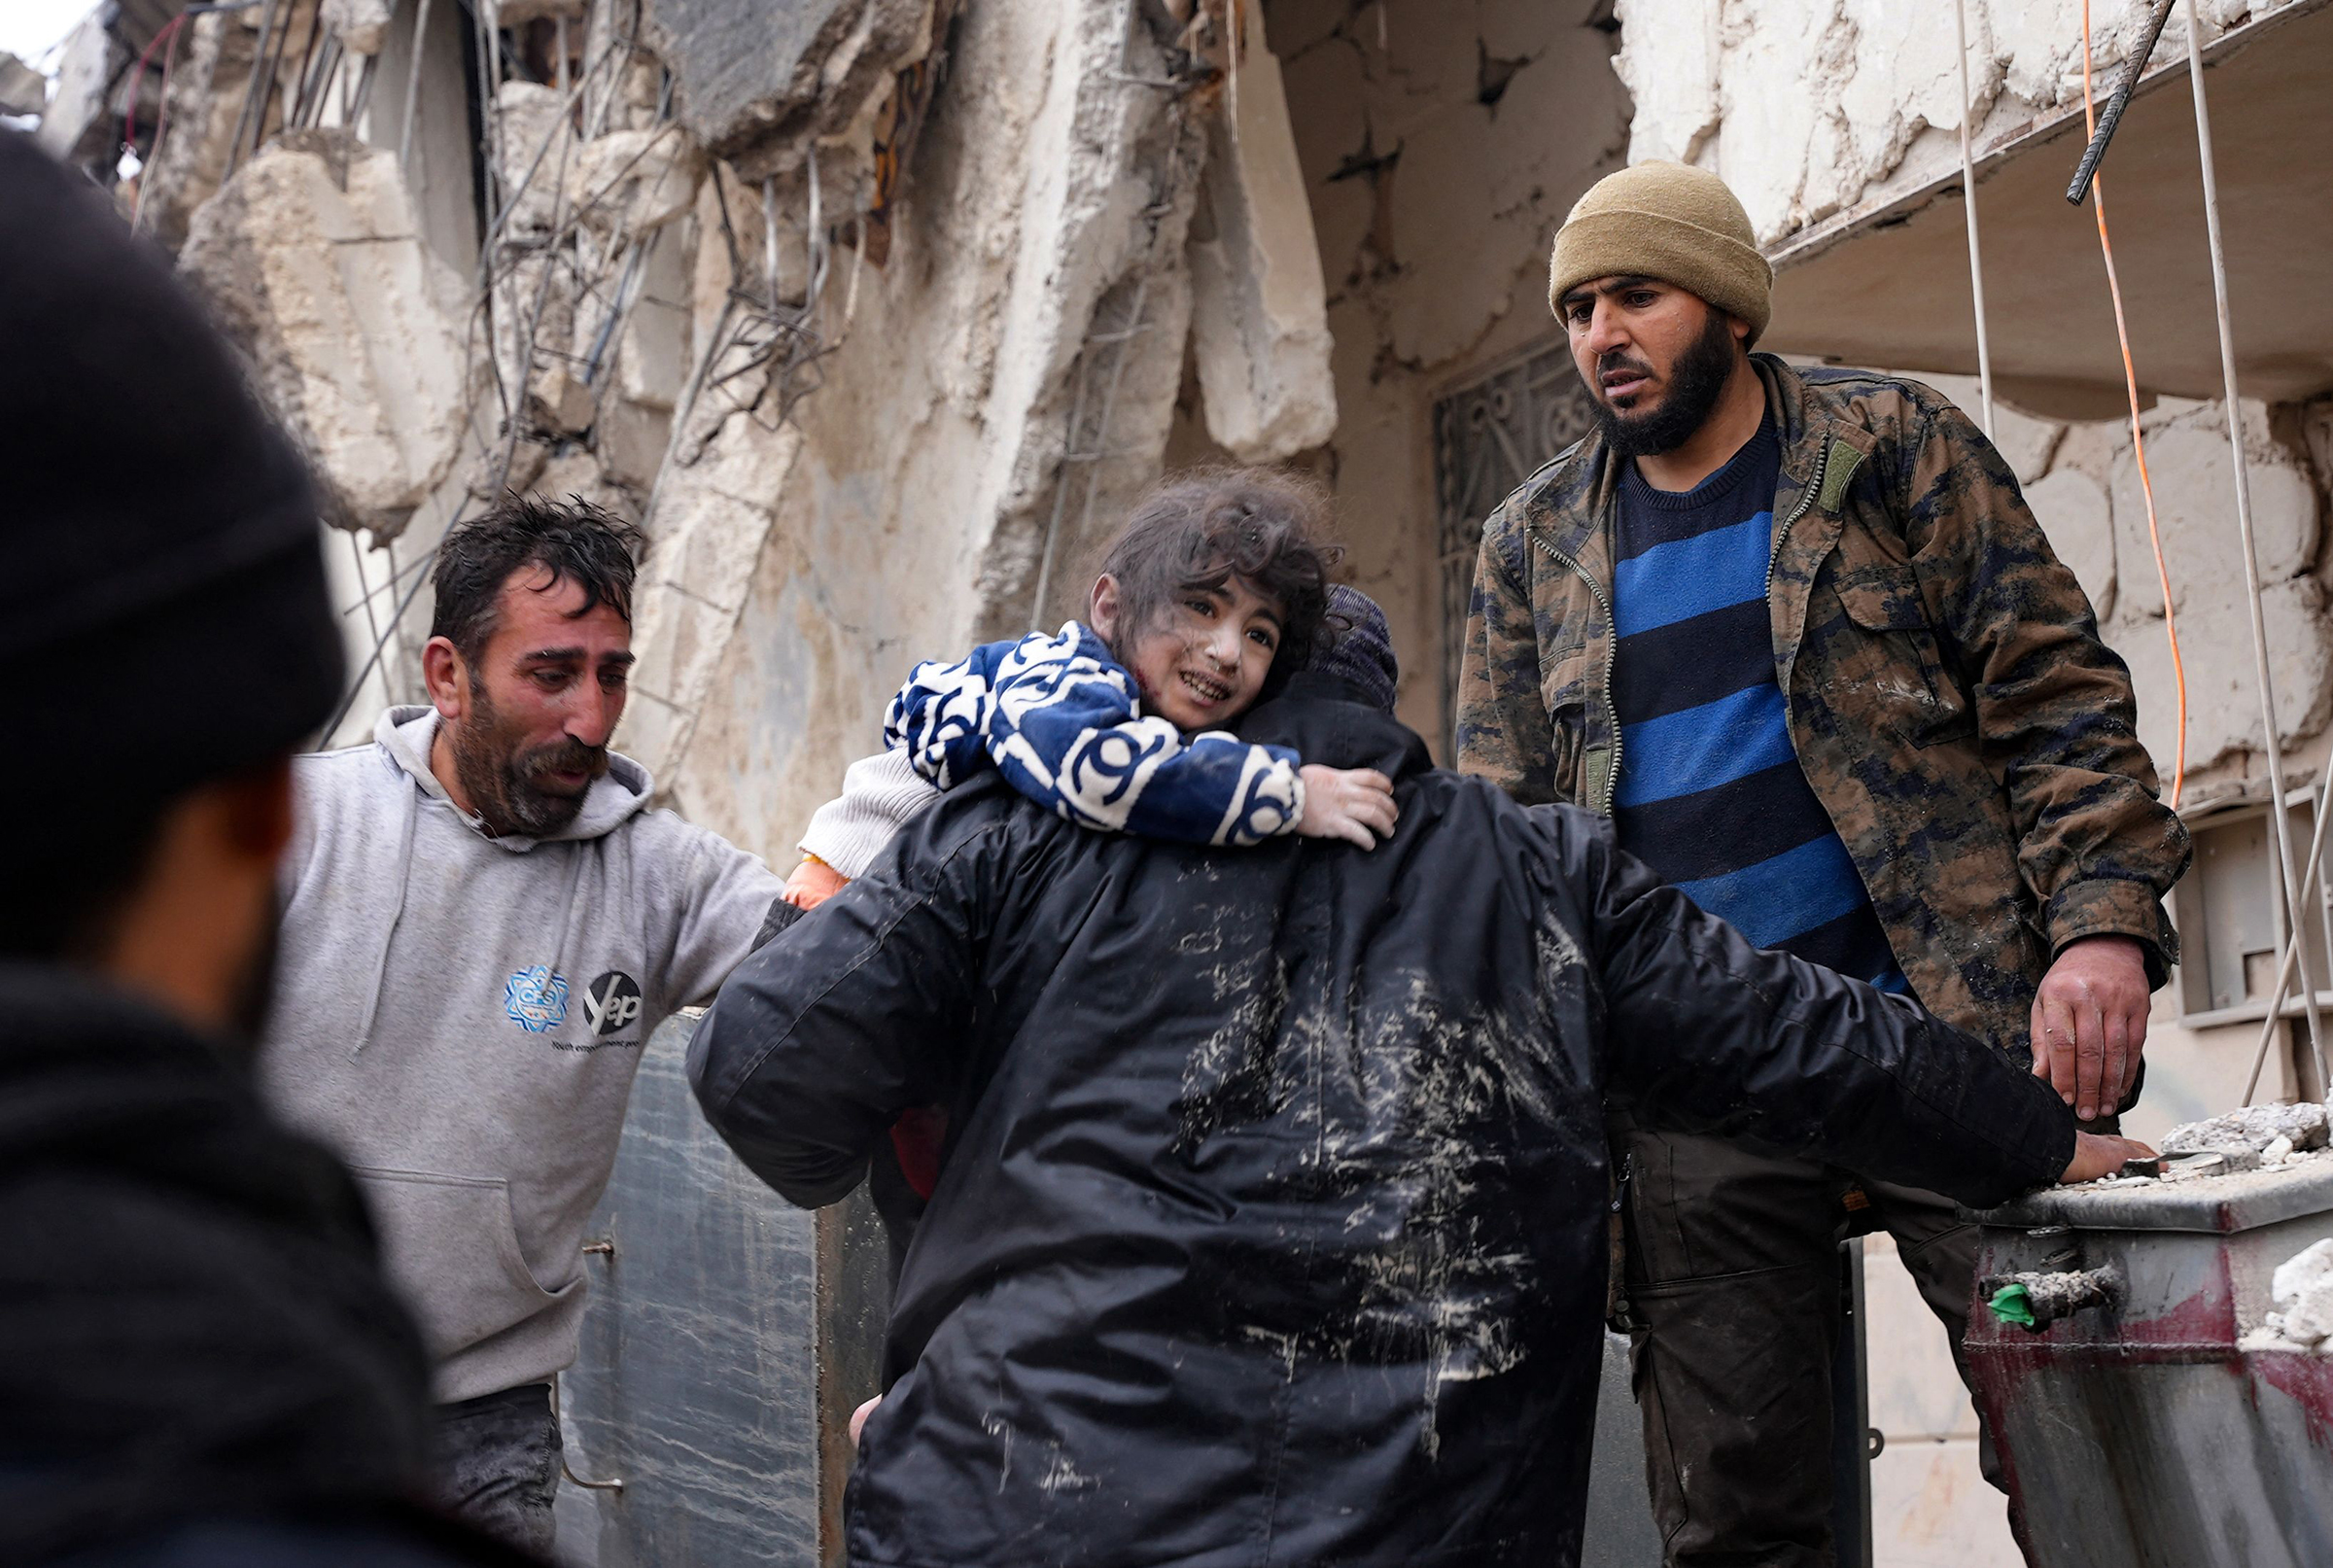 Residents rescue a child from the rubble of a collapsed building following an earthquake in the town of Jandaris, Syria. (Rami Al Sayed—AFP/Getty Images)